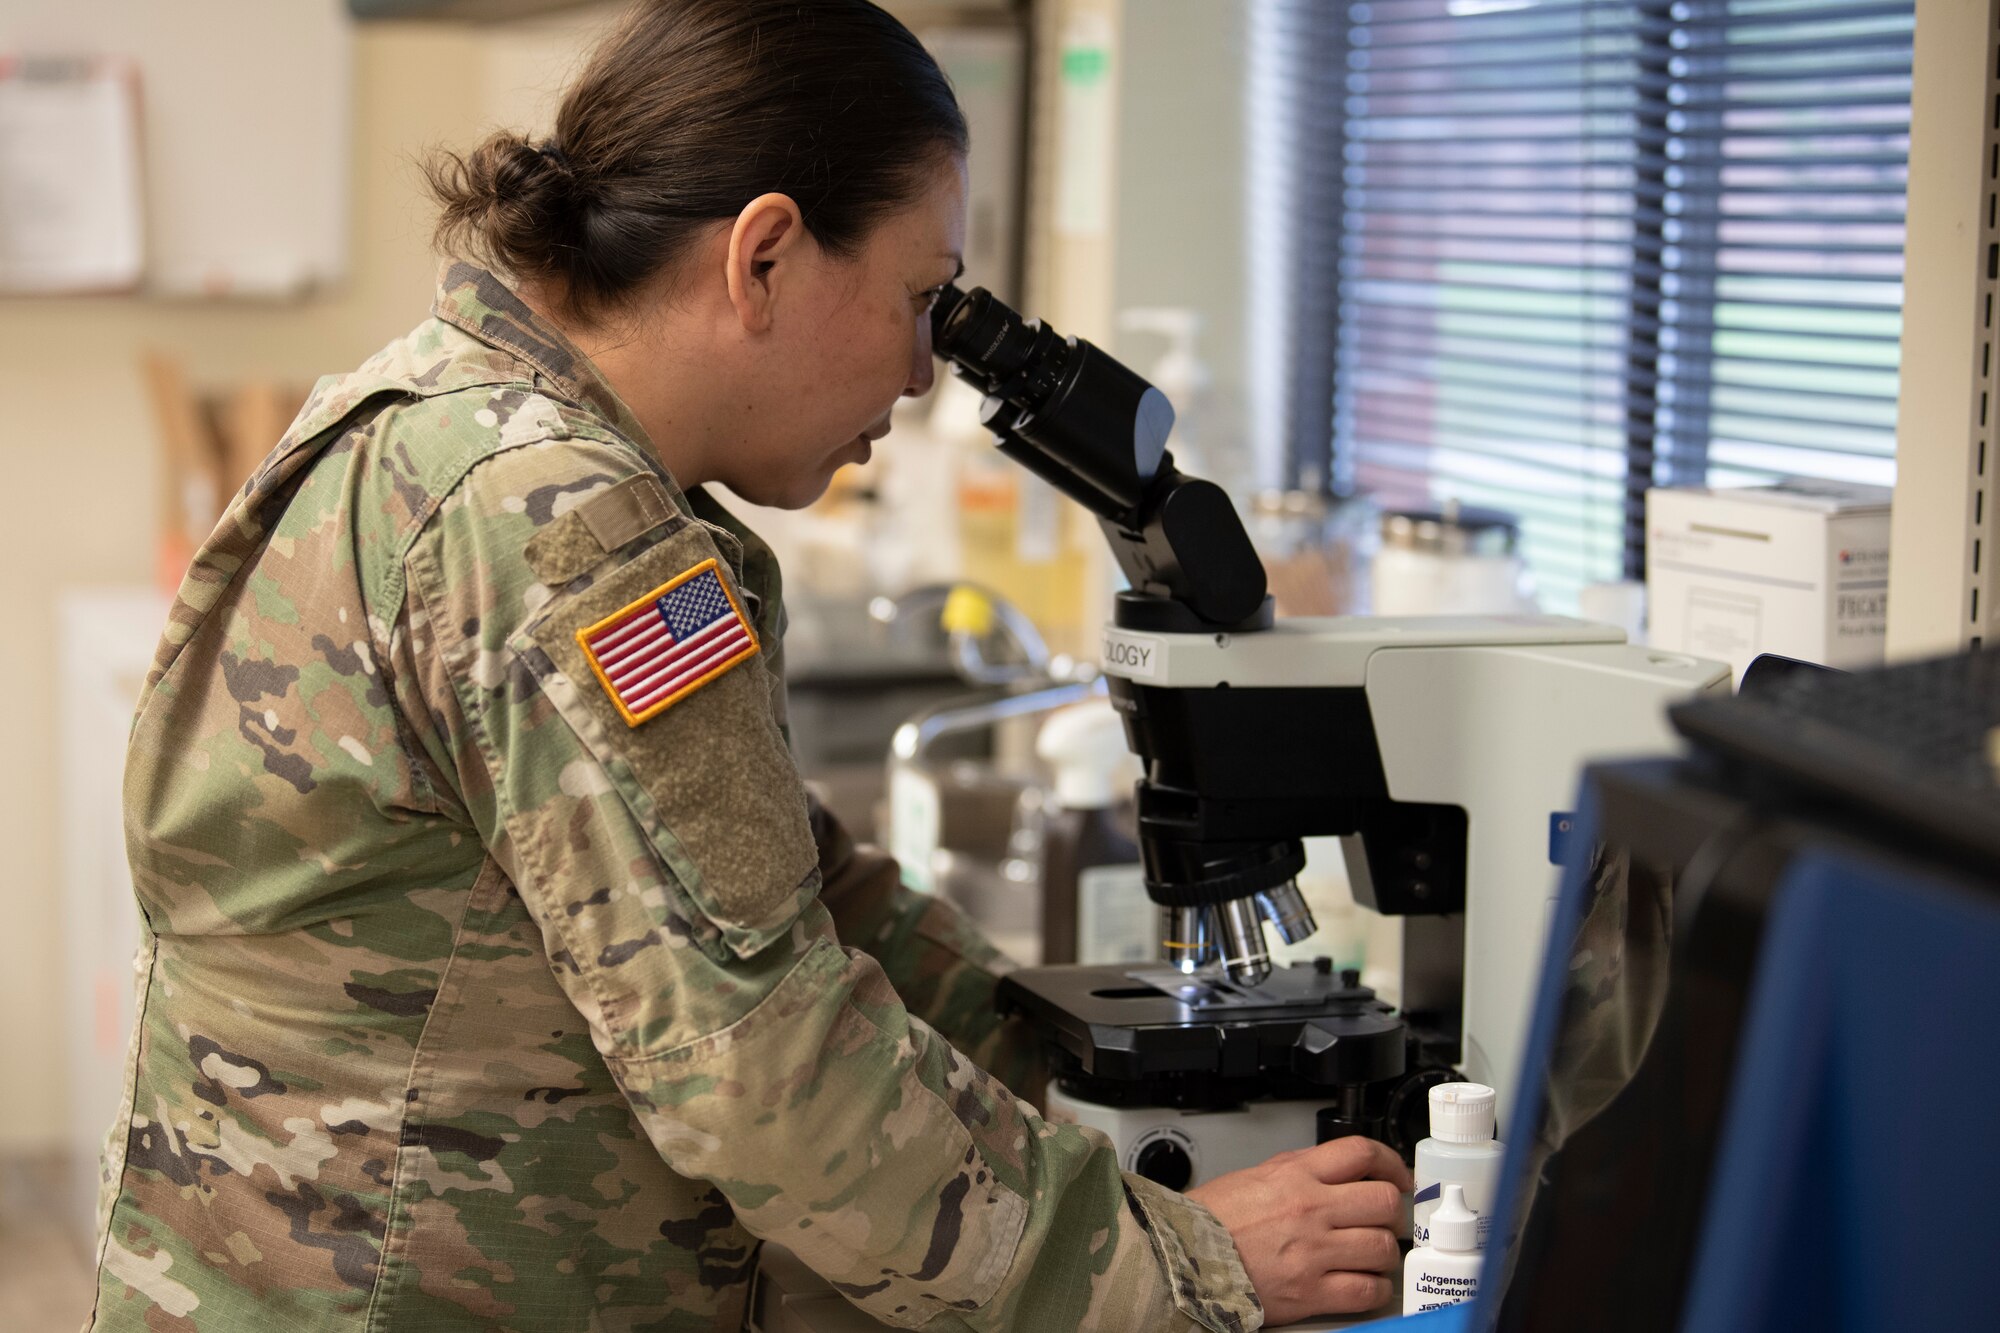 A photo of a Soldier examining a sample under a microscope.